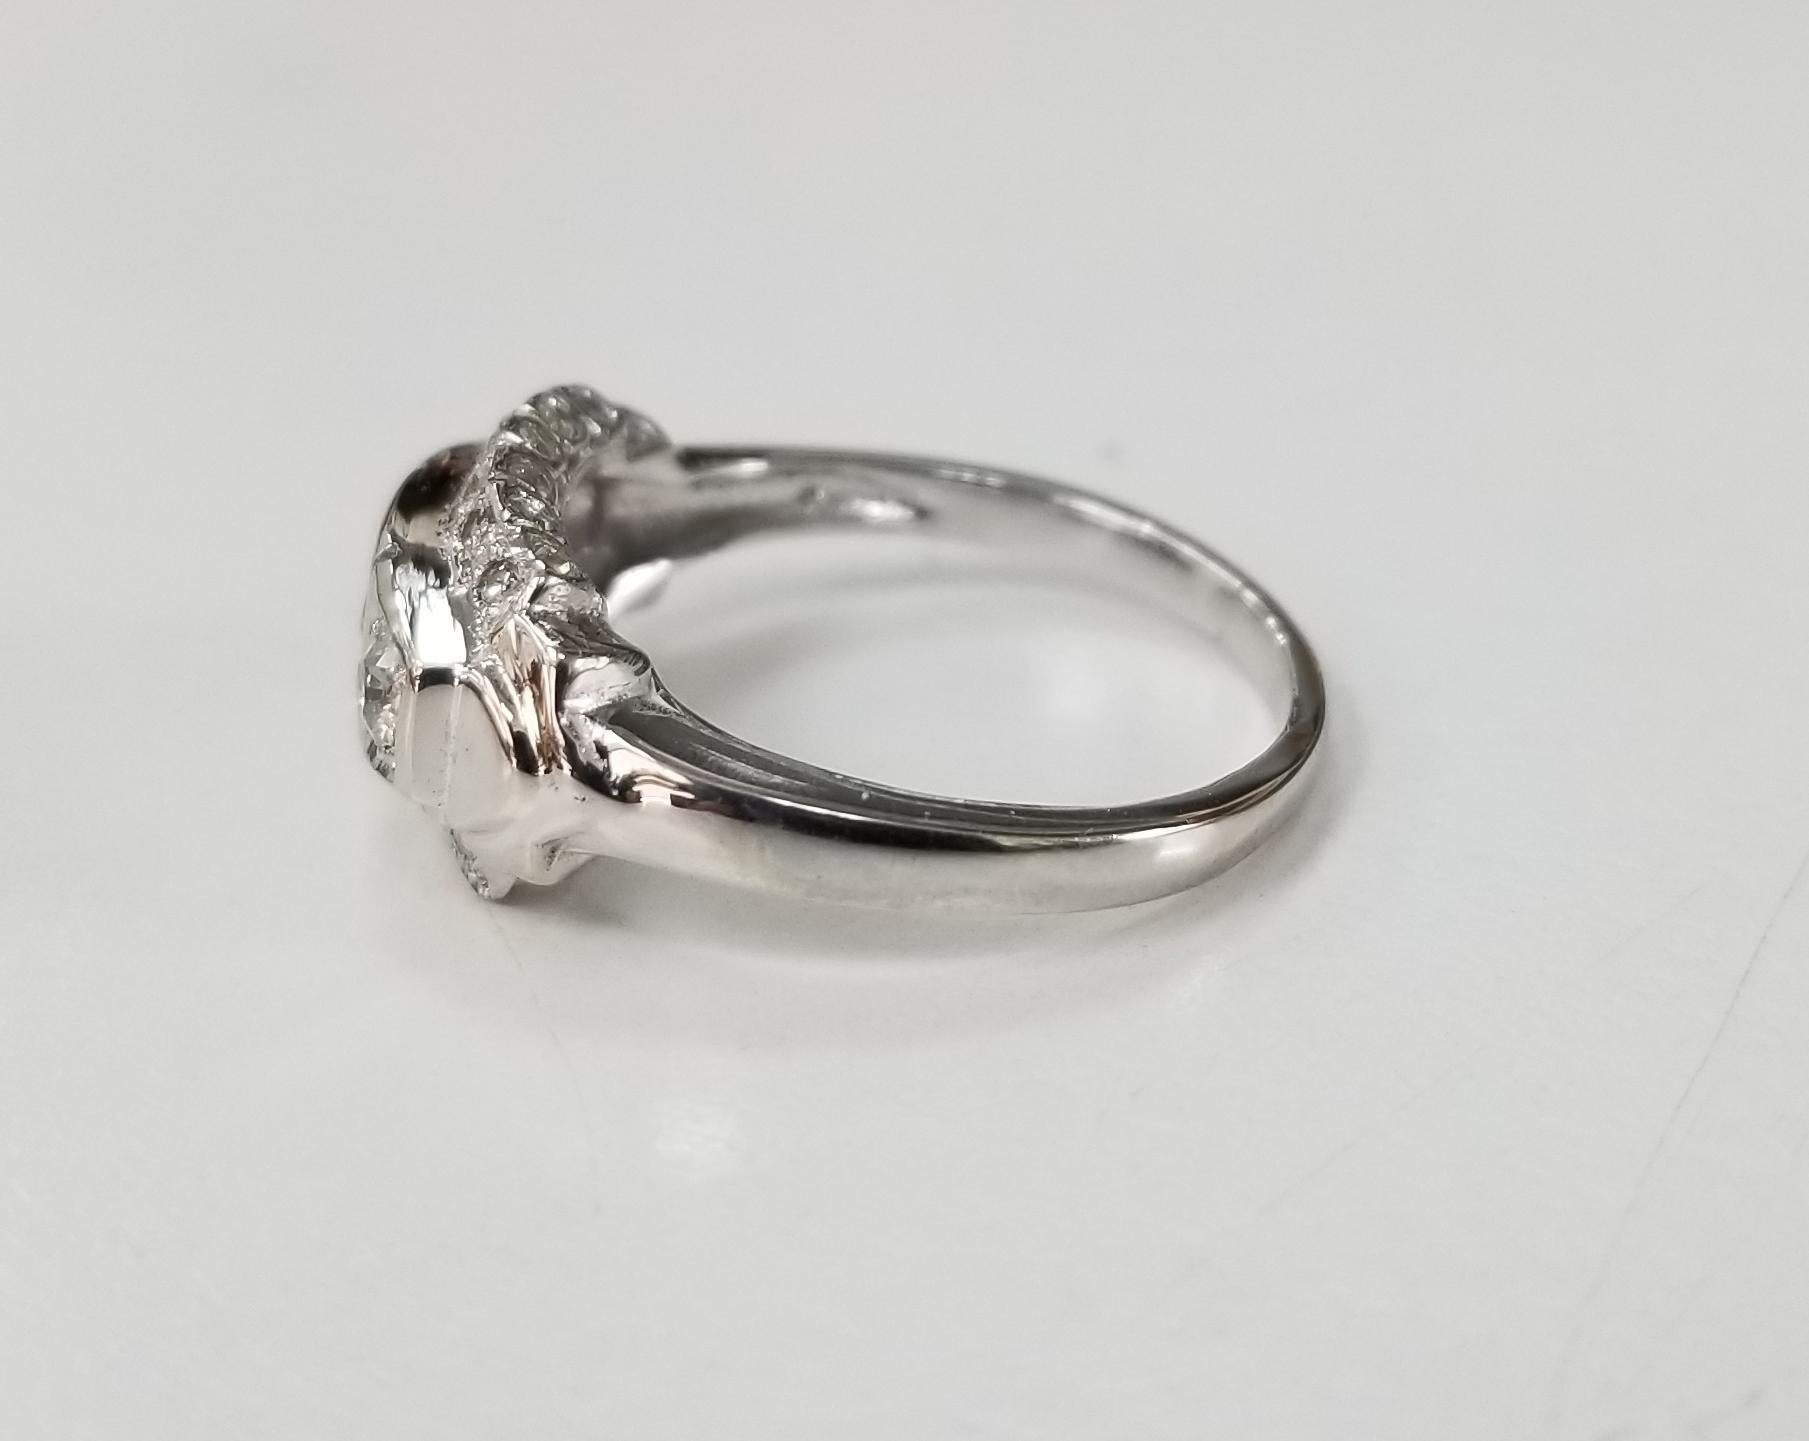 14 Karat Art Deco Style Diamond Filigree Ring with Rose Cut Diamonds In Excellent Condition For Sale In Los Angeles, CA